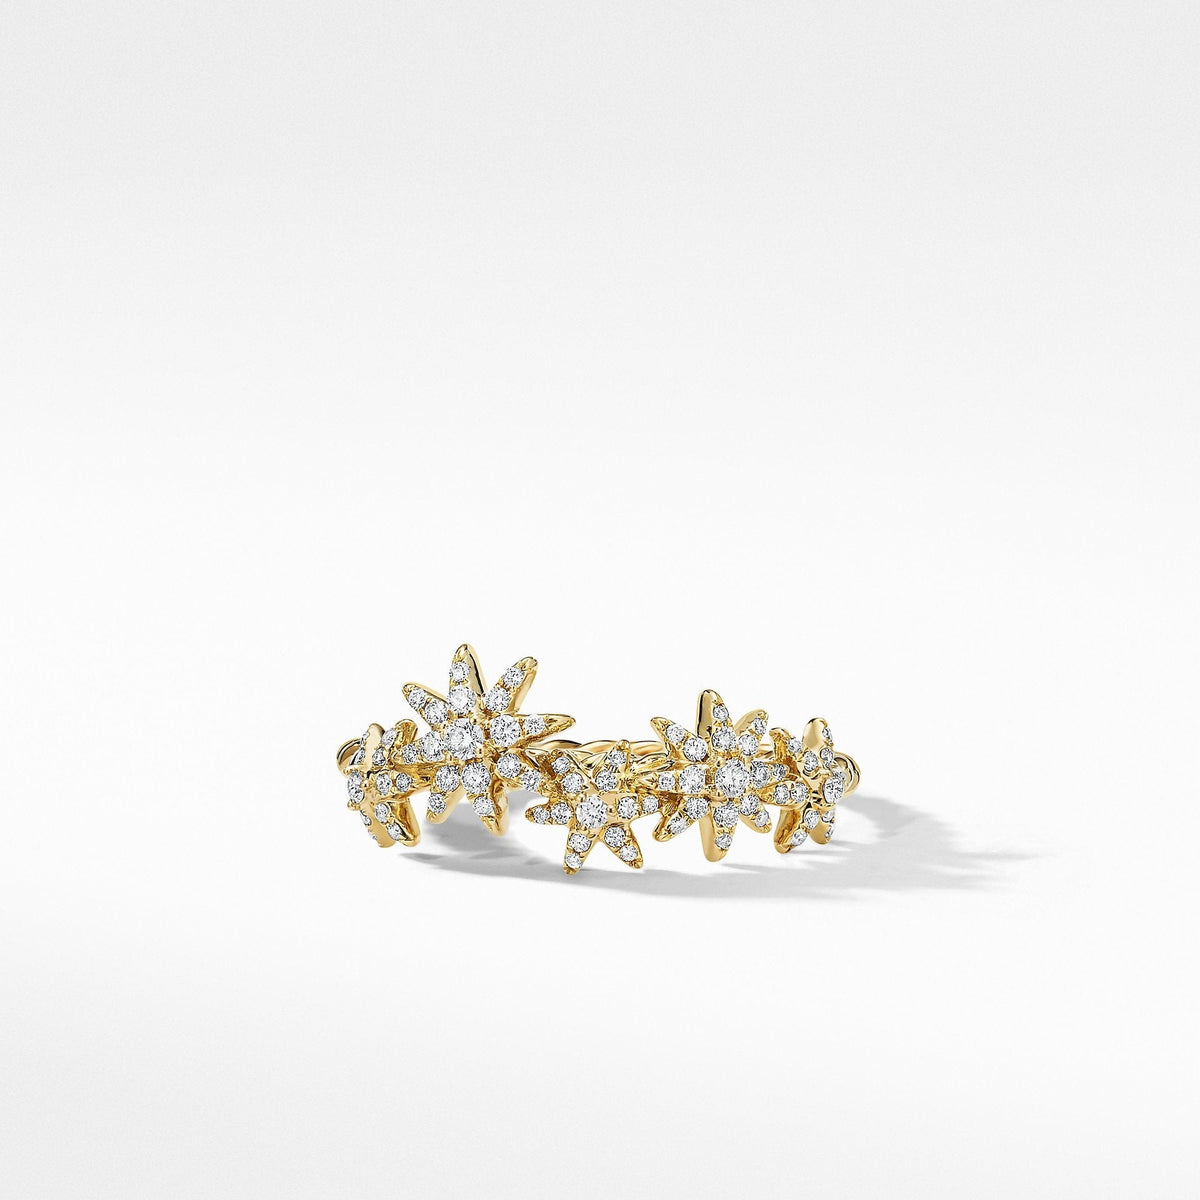 Starburst Cluster Band Ring in 18K Yellow Gold with Pavé Diamonds